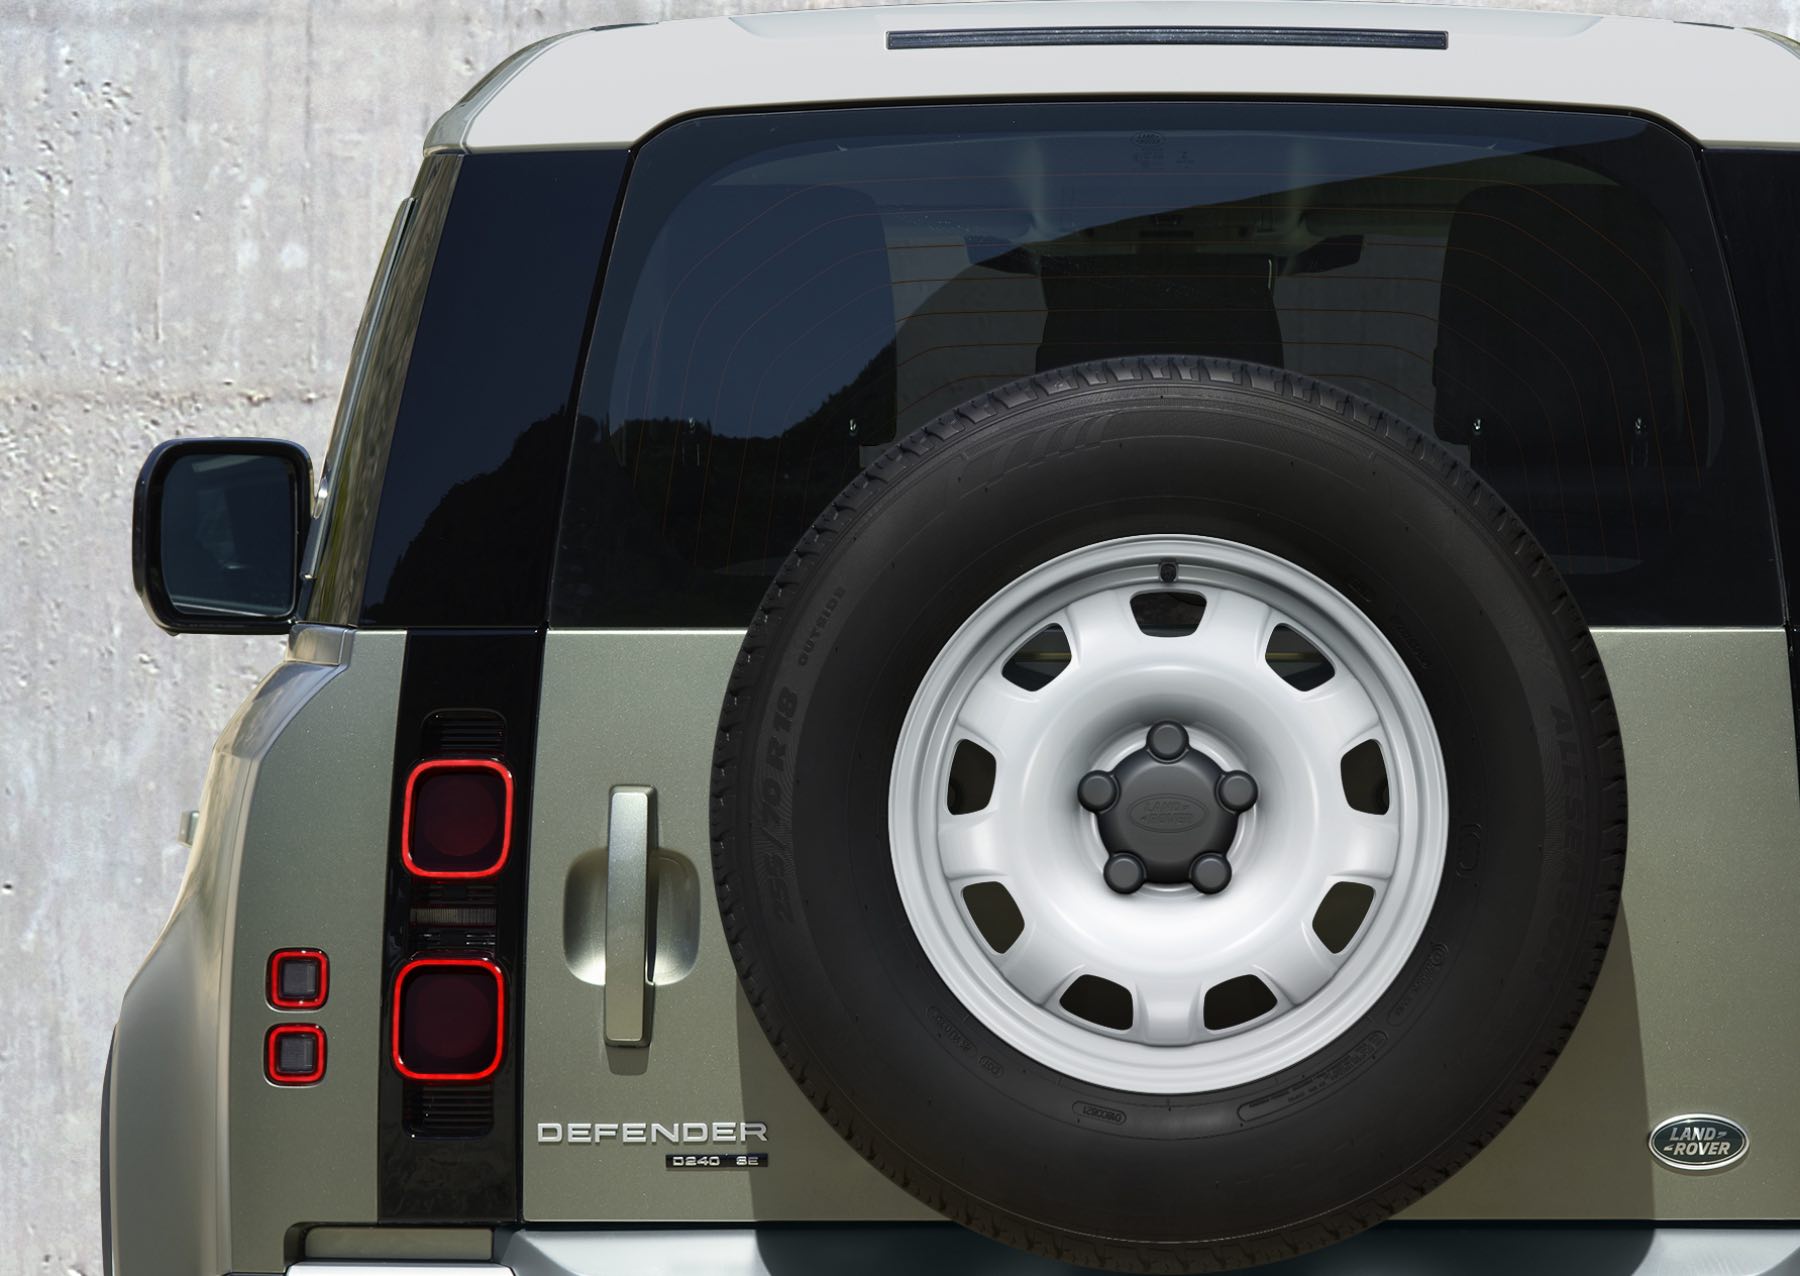 The rear-mounted spare steel wheel on a Land Rover Defender.